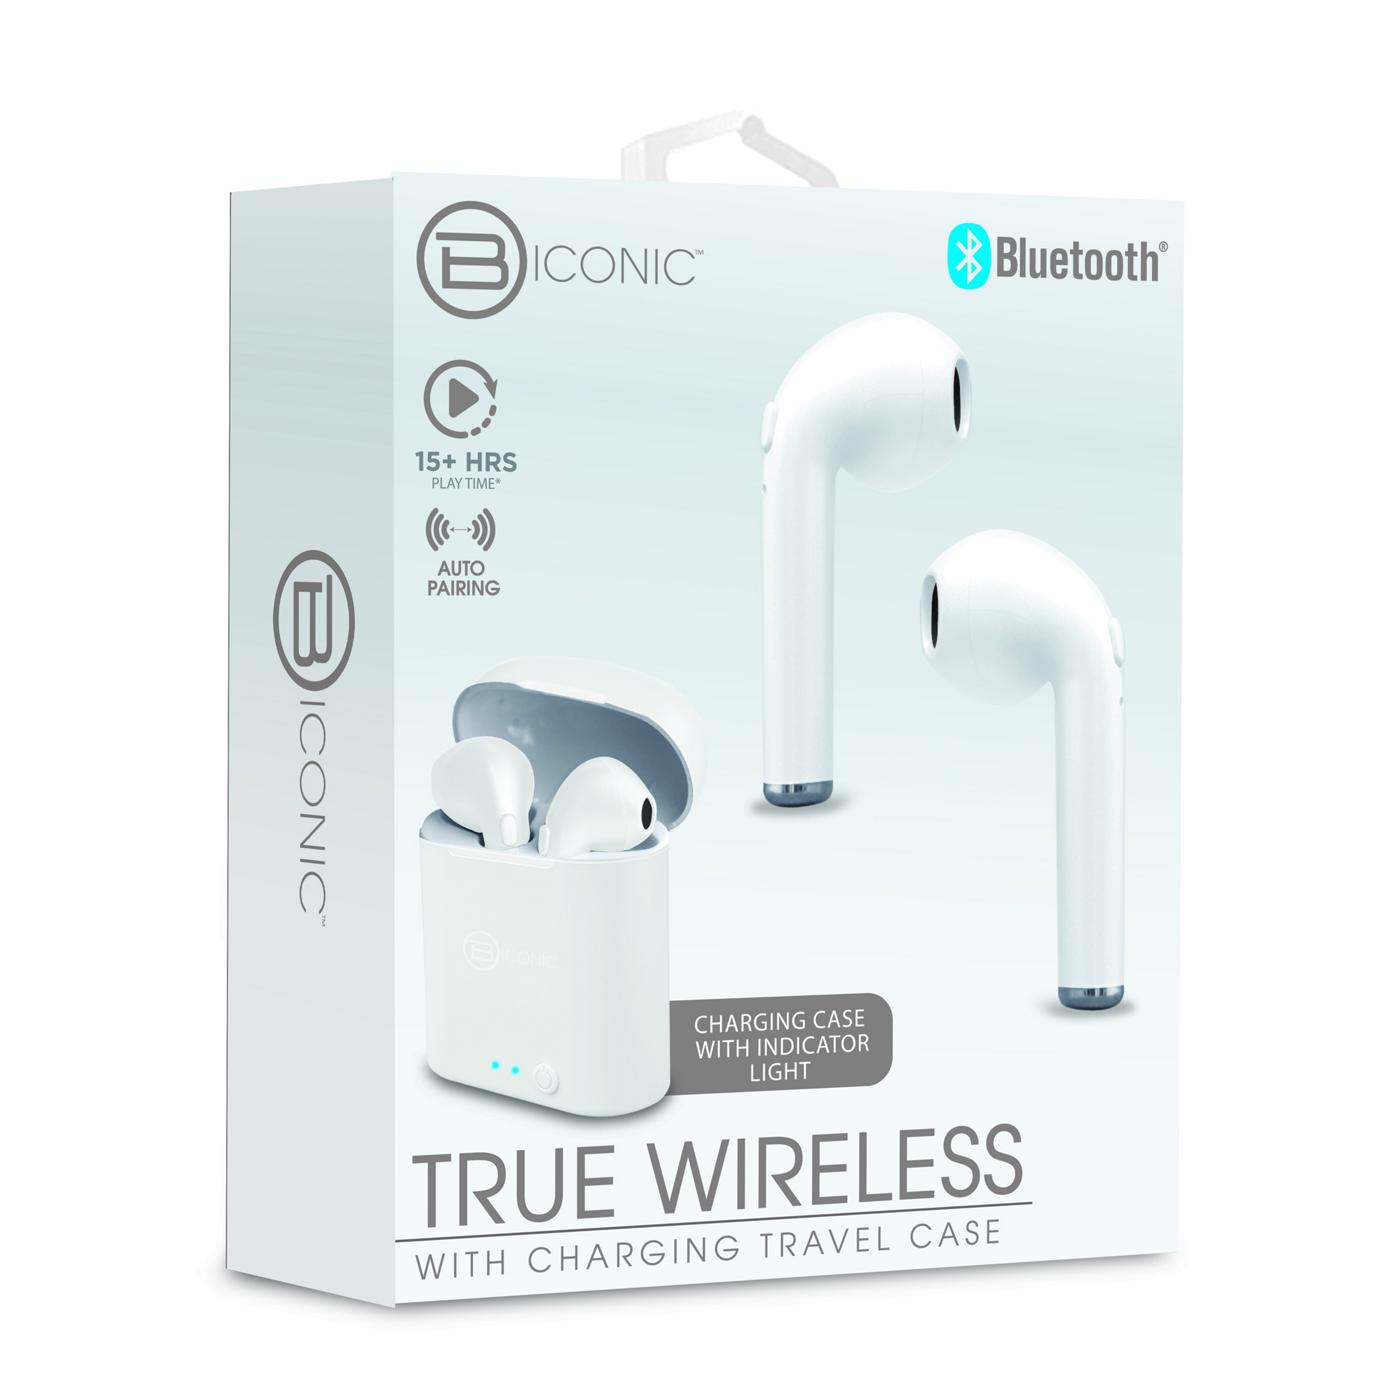 Biconic True Wireless White Earbuds with Charging Case; image 2 of 2